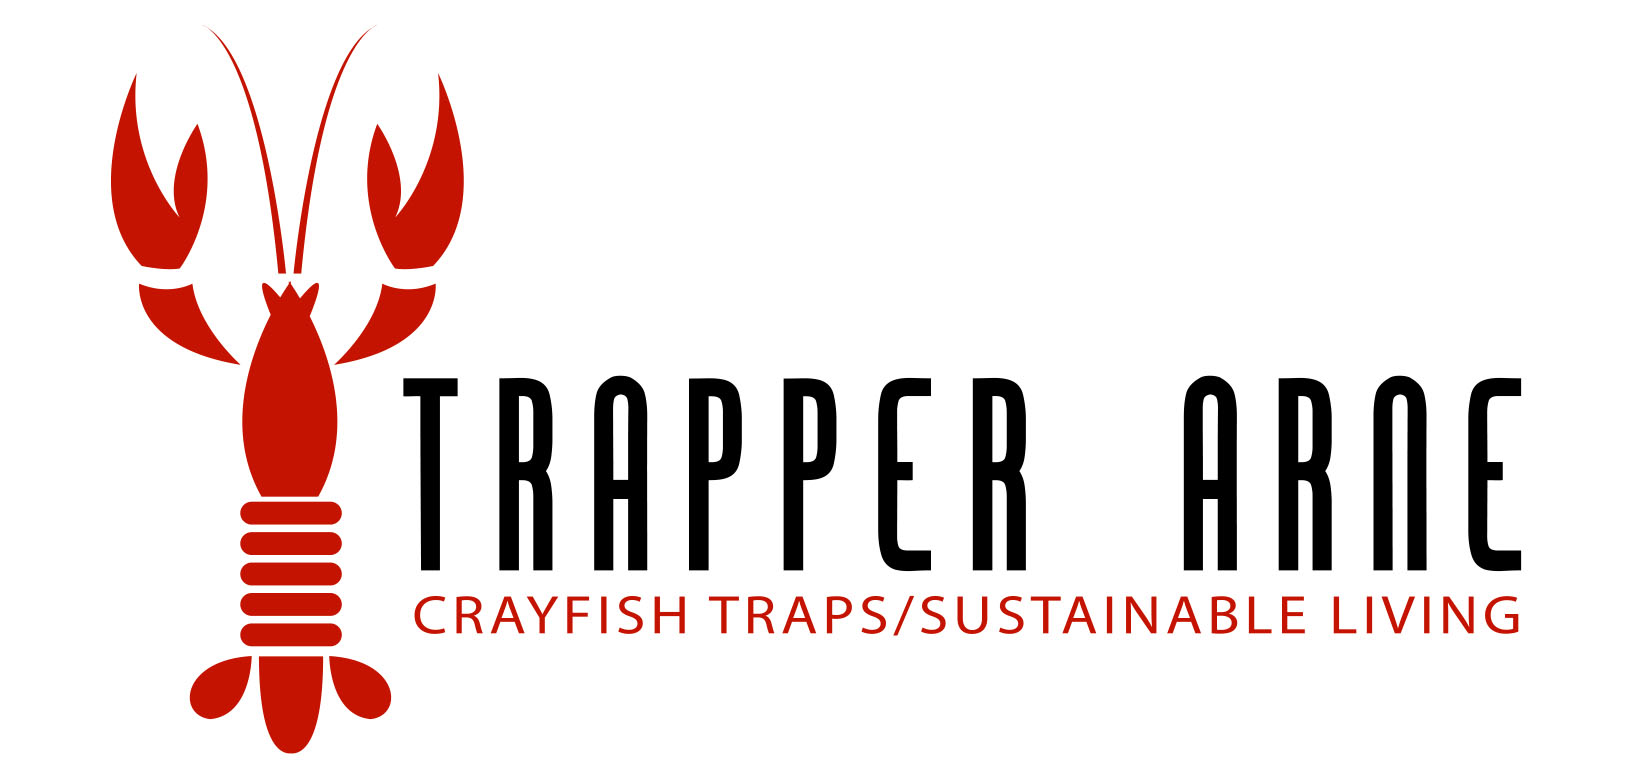 How to Trap Crayfish